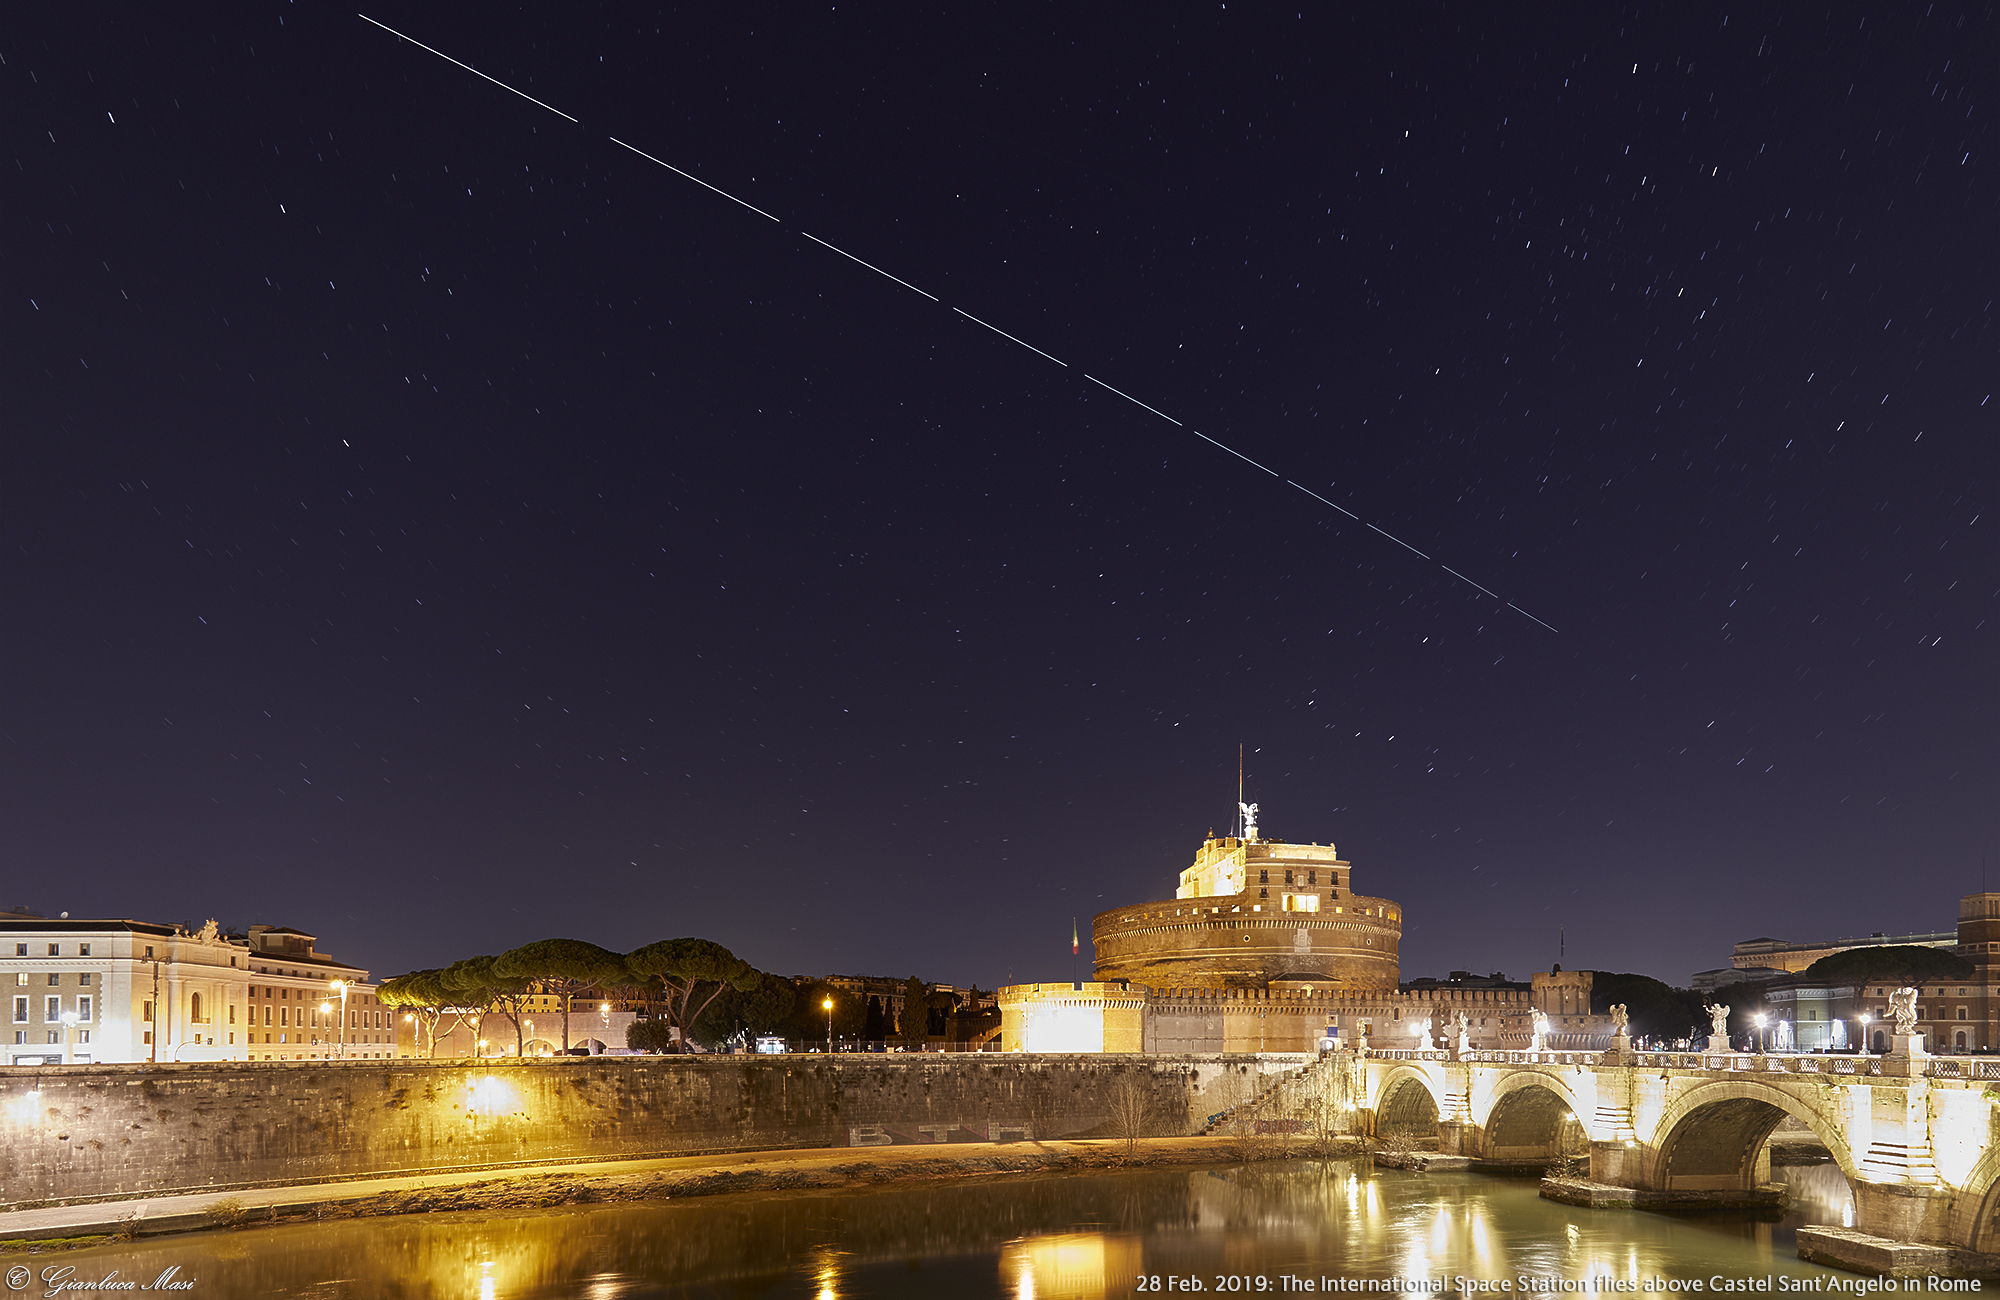 The International Space Station surfs the sky above Castel Sant’Angelo in Rome - 28 Feb. 2019.